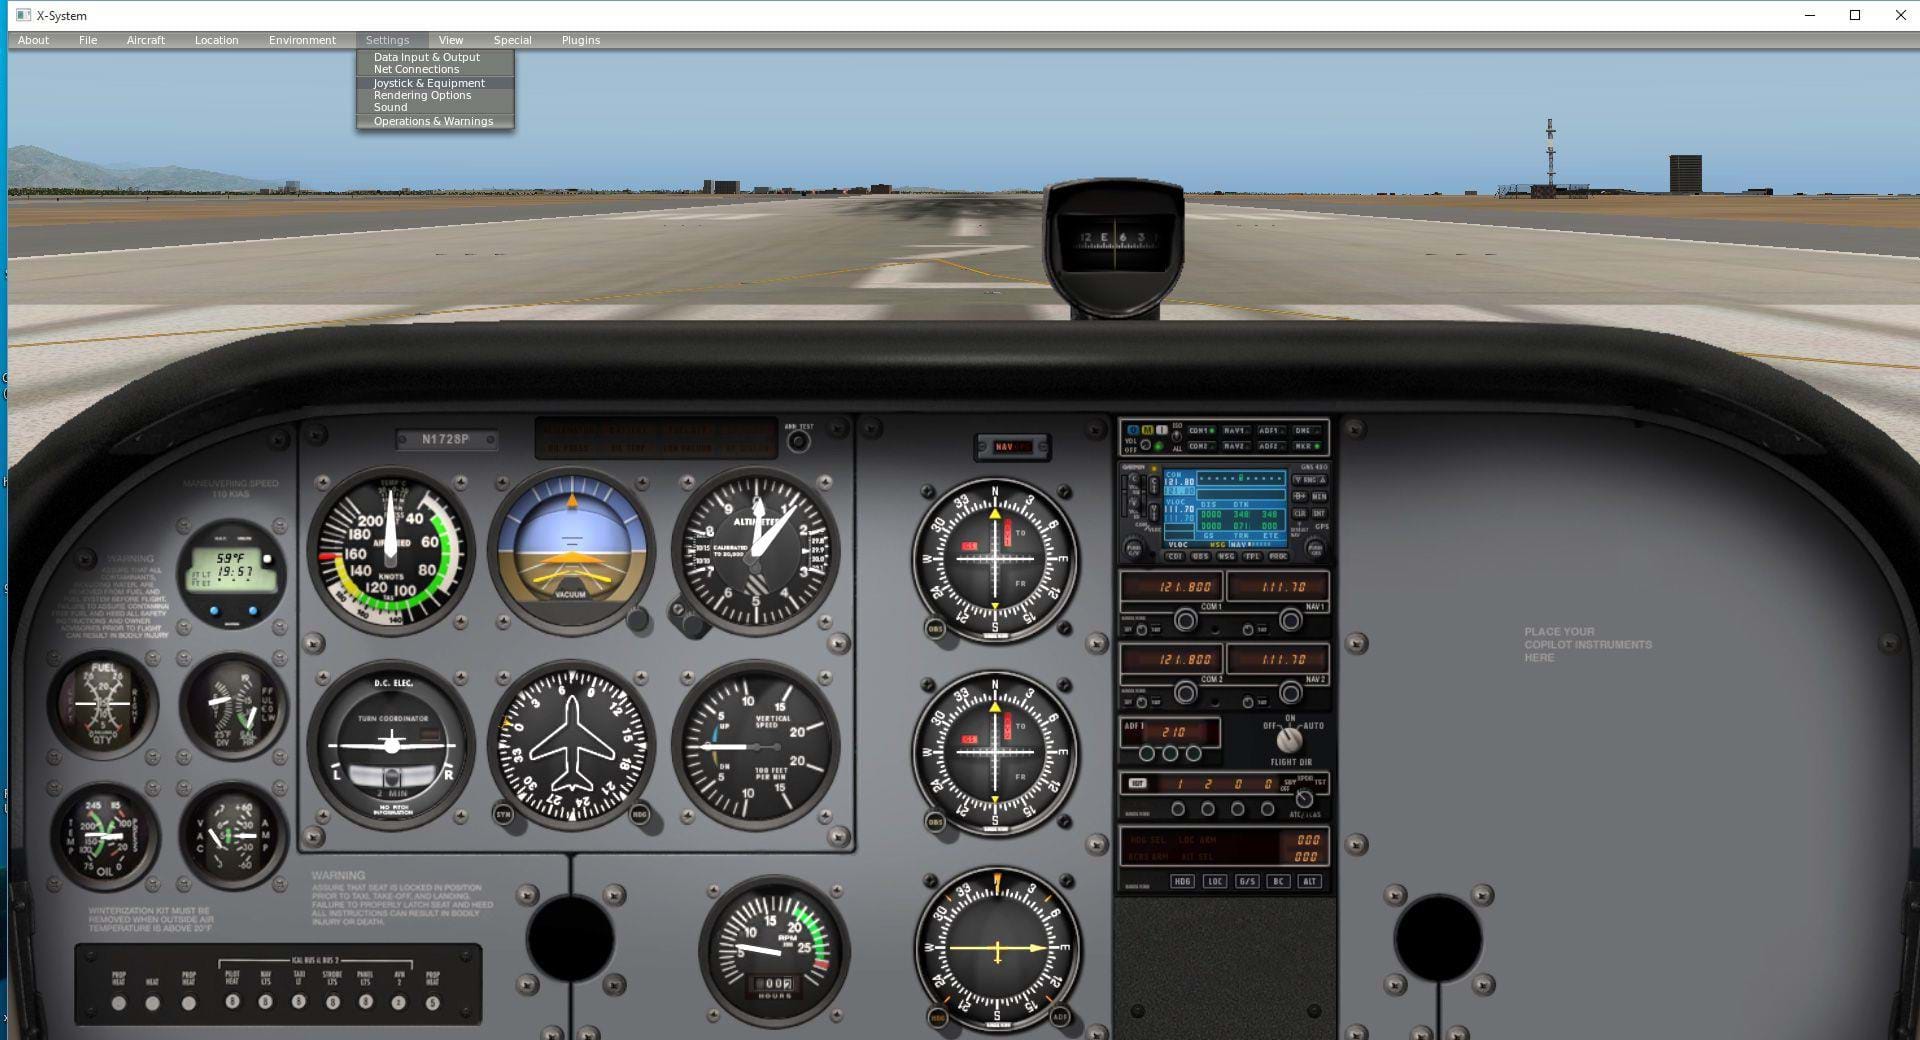 The top menu of X-Plane, which appears when you move the mouse cursor to the top of the window.